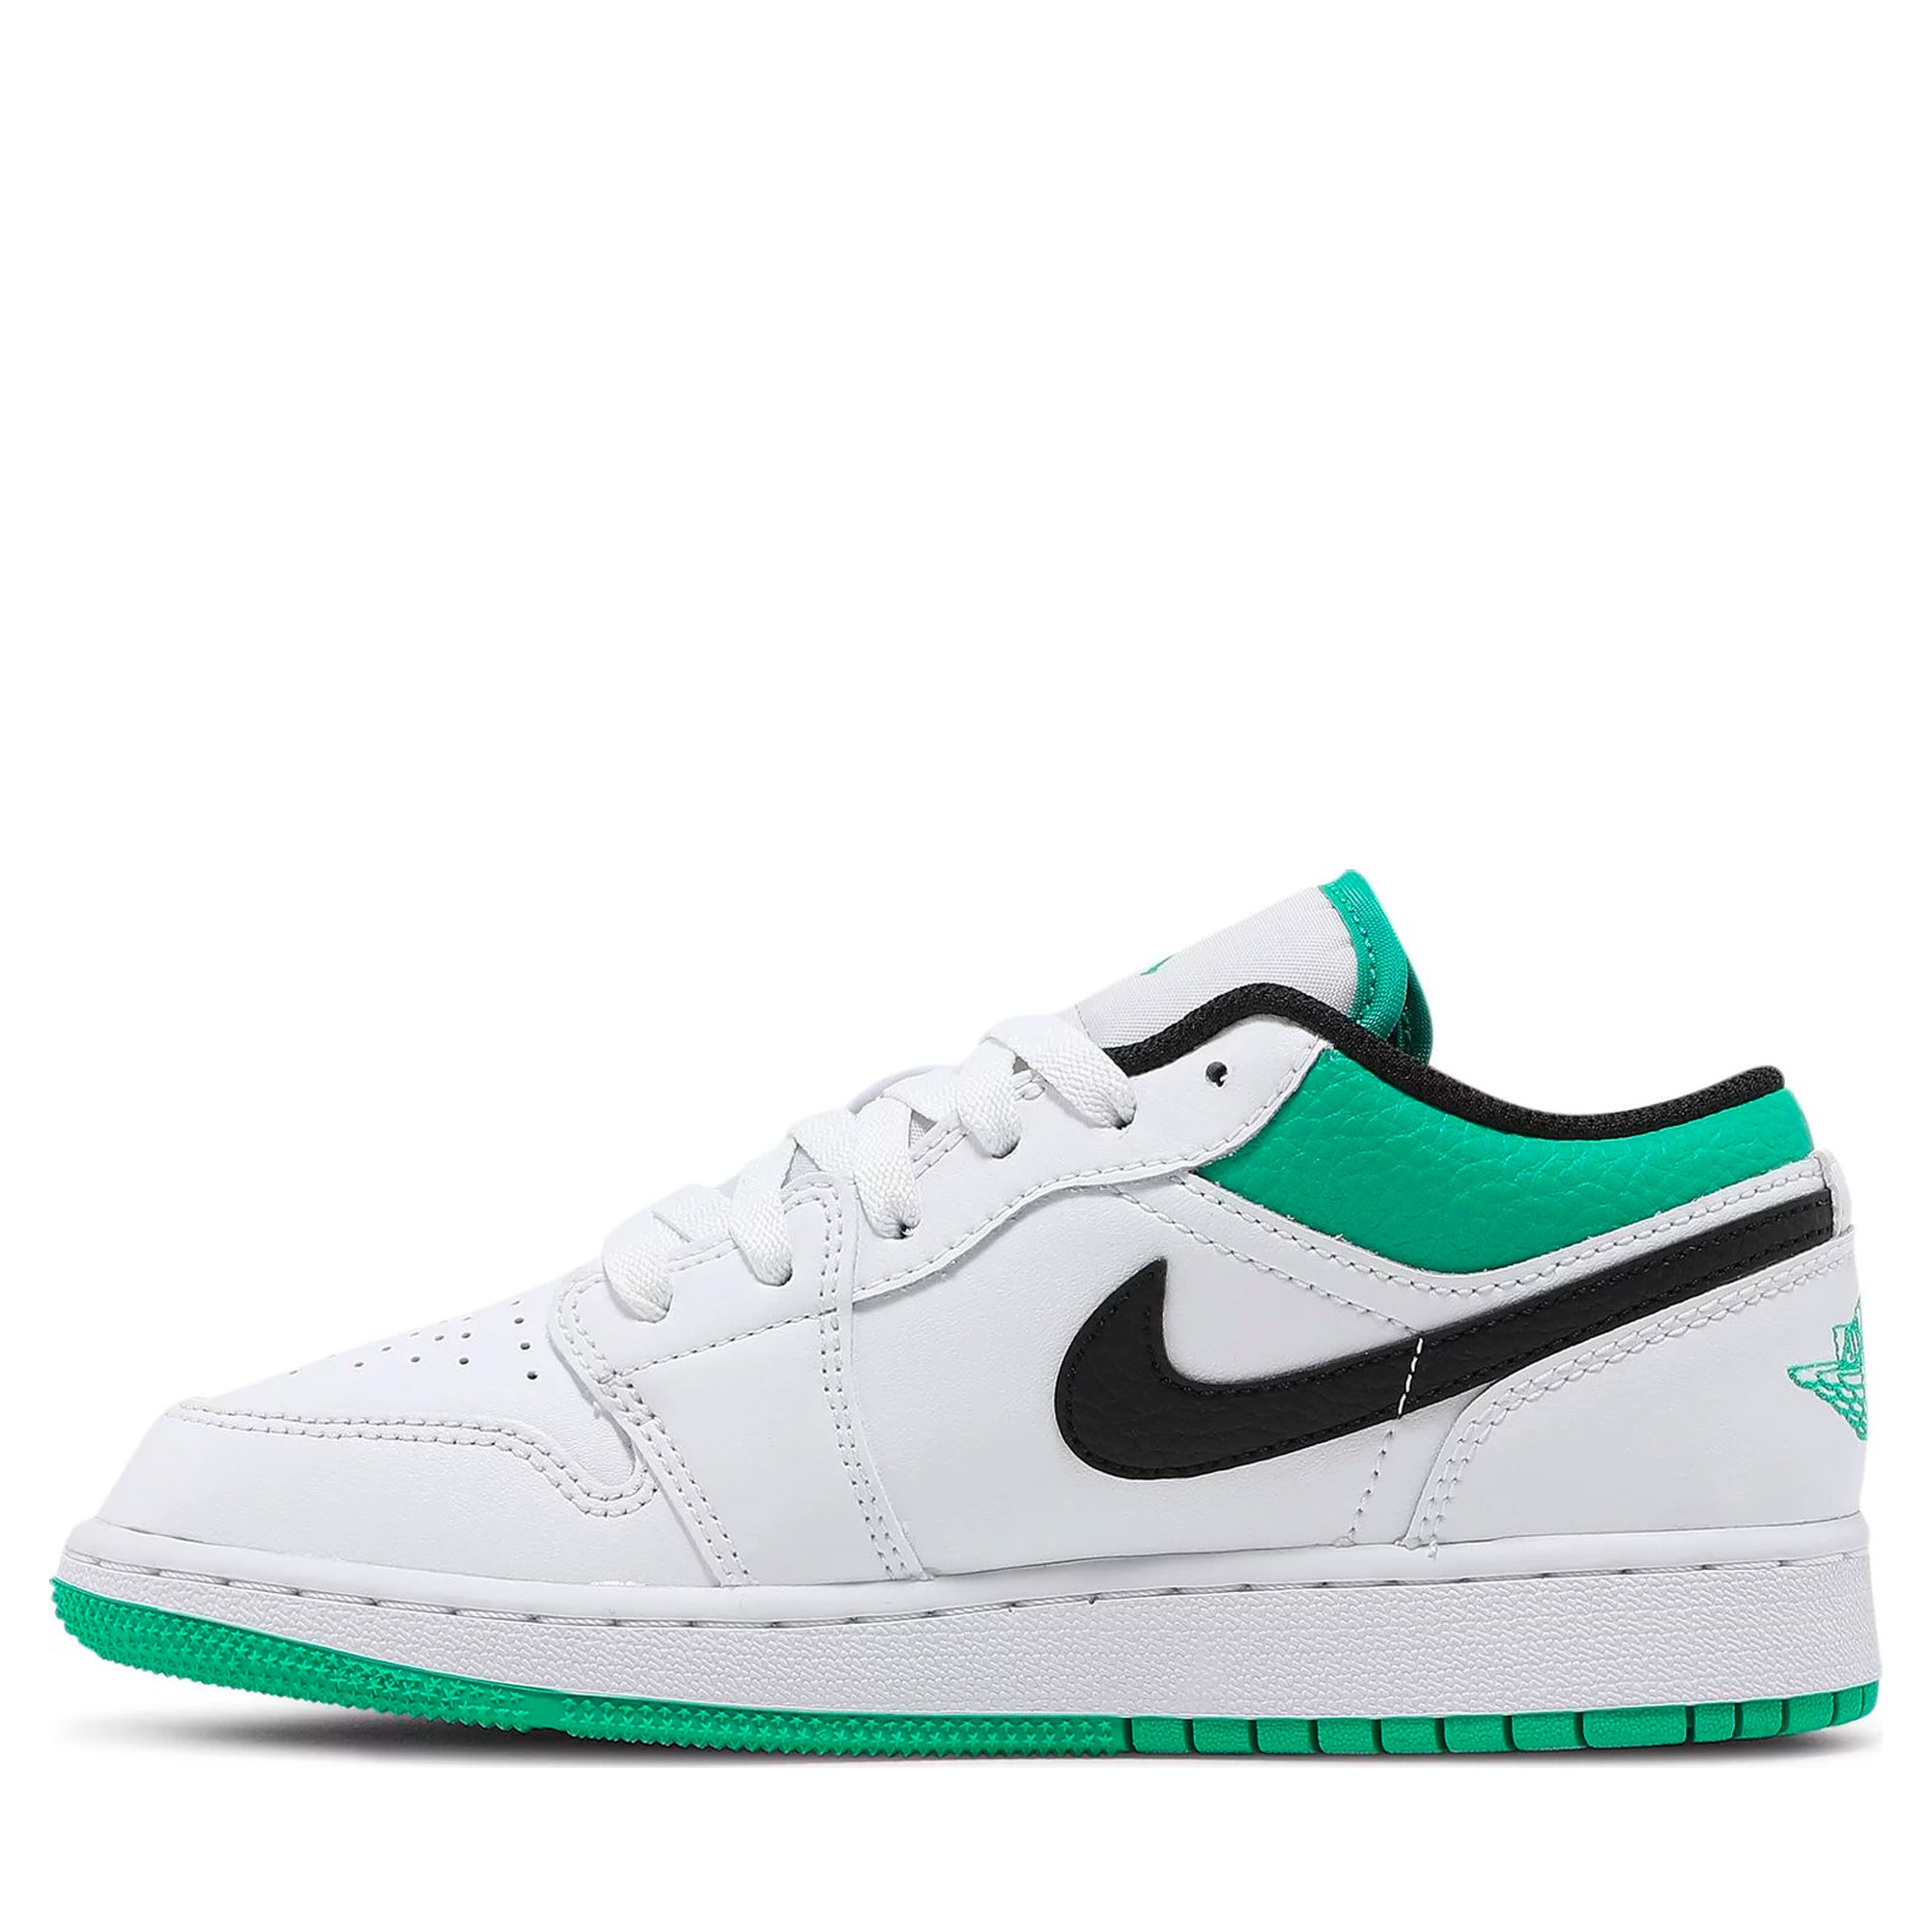 Jordan 1 Low White Lucky Green Tumbled Leather (GS)-PLUS